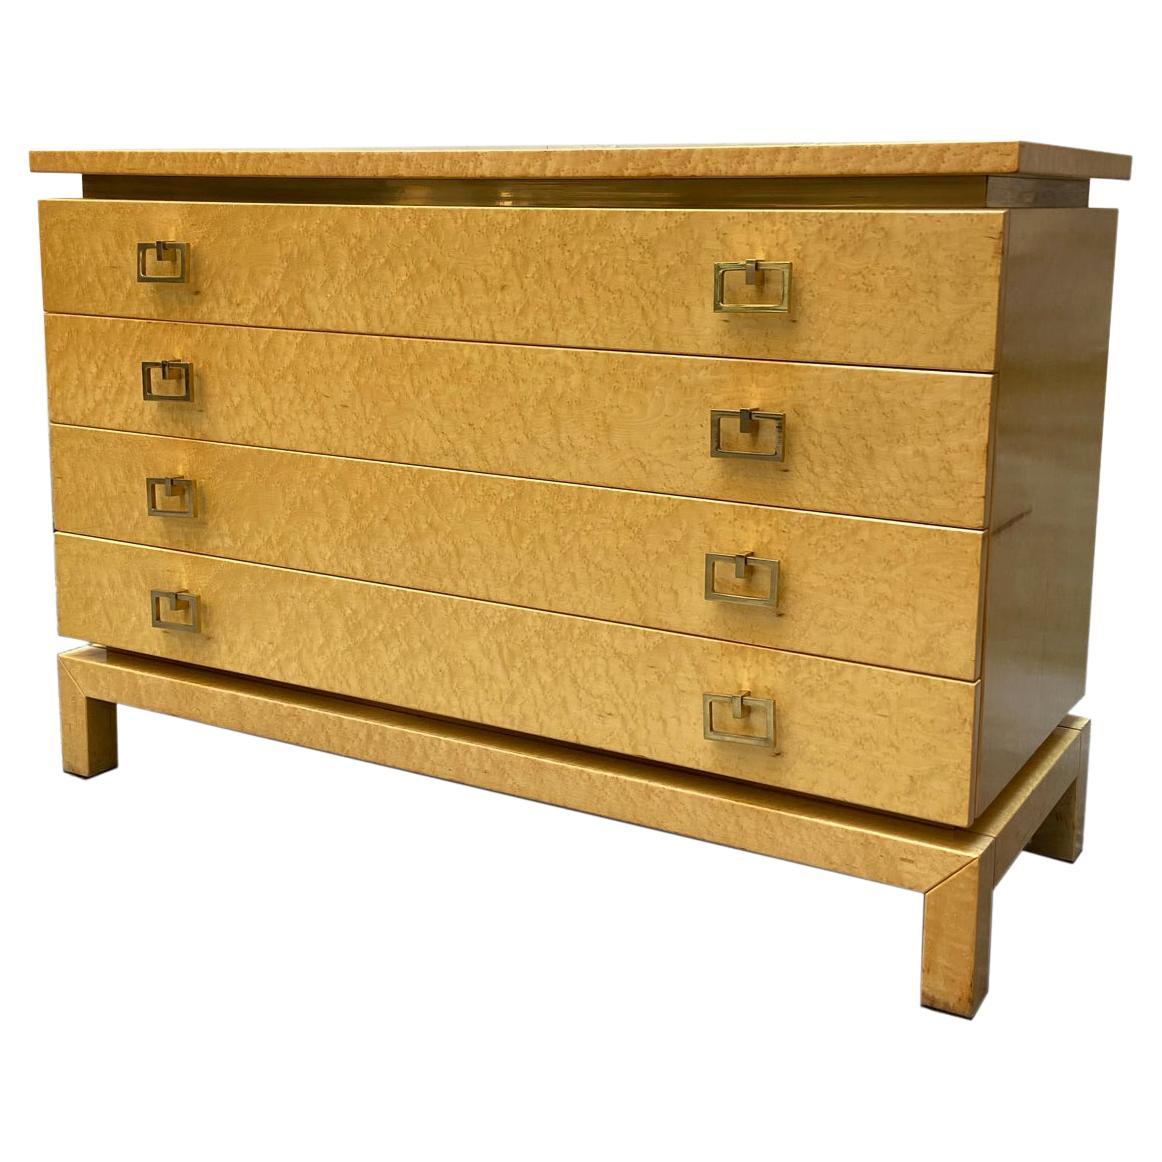 Chest of Drawers in Light Briar Wood with Brass Handles and Profiles, Italy 1970